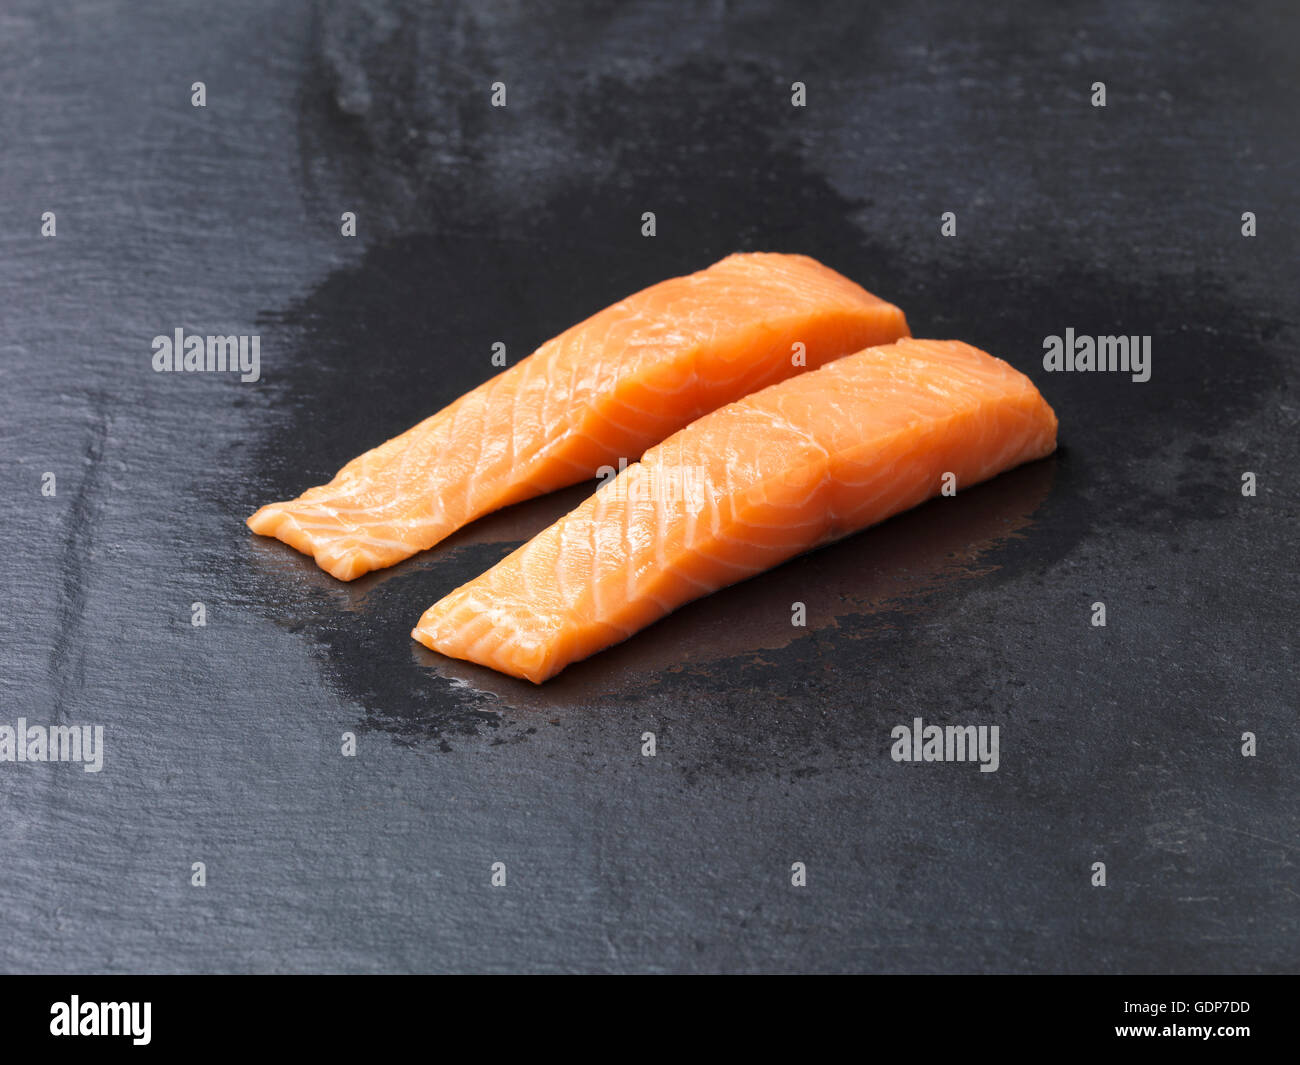 https://c8.alamy.com/comp/GDP7DD/food-raw-fish-two-line-caught-natural-salmon-fillets-on-slate-GDP7DD.jpg